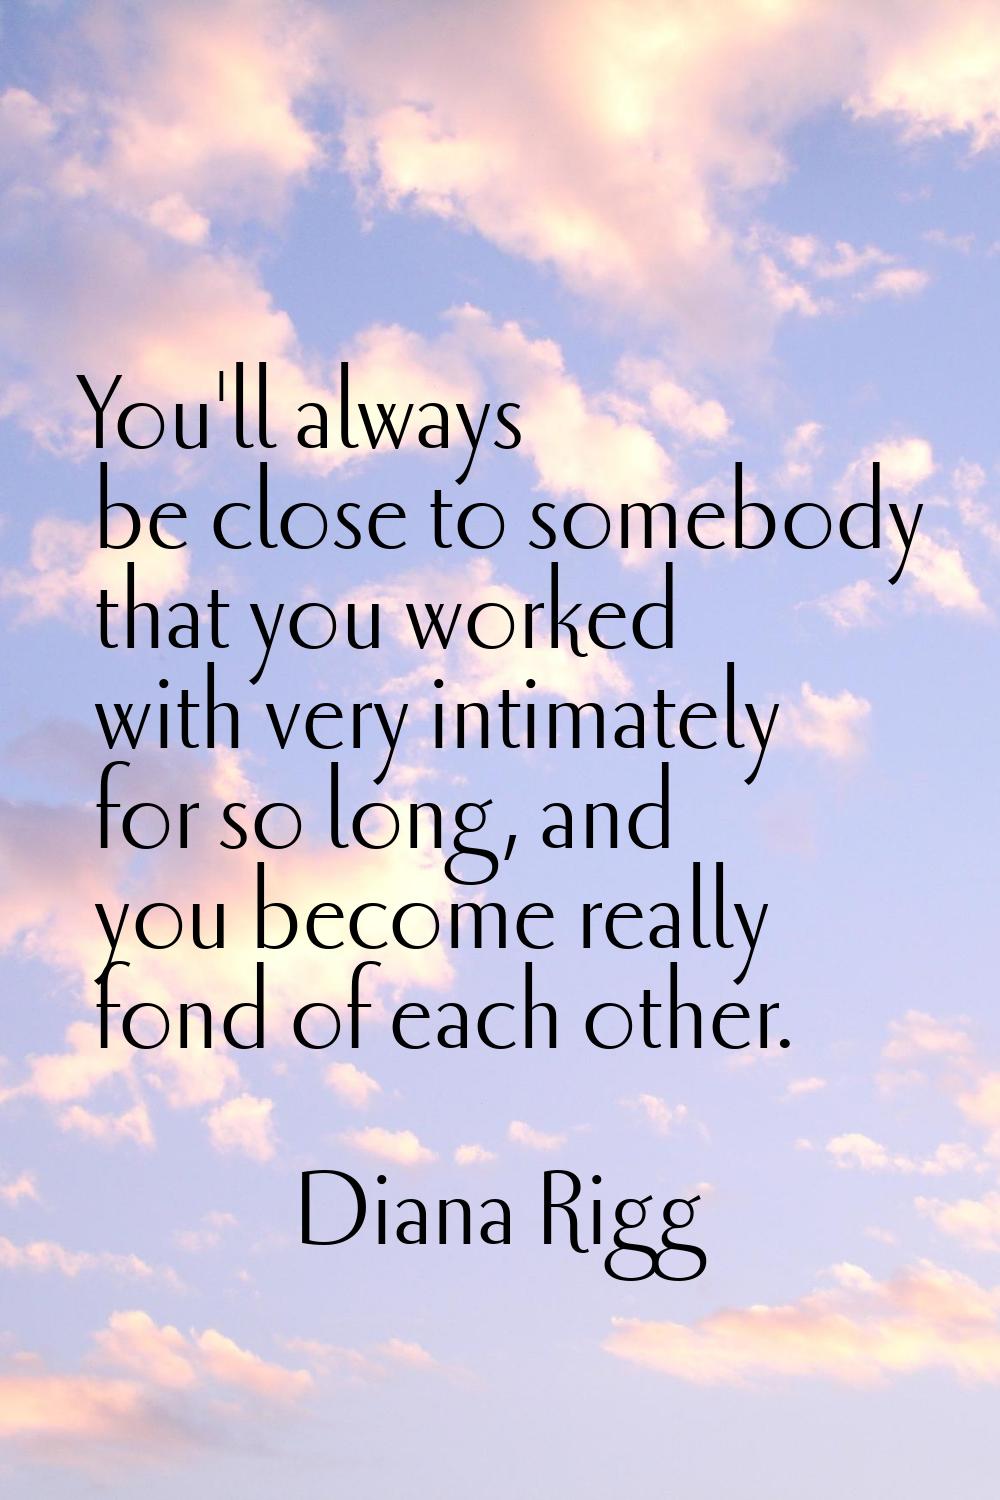 You'll always be close to somebody that you worked with very intimately for so long, and you become